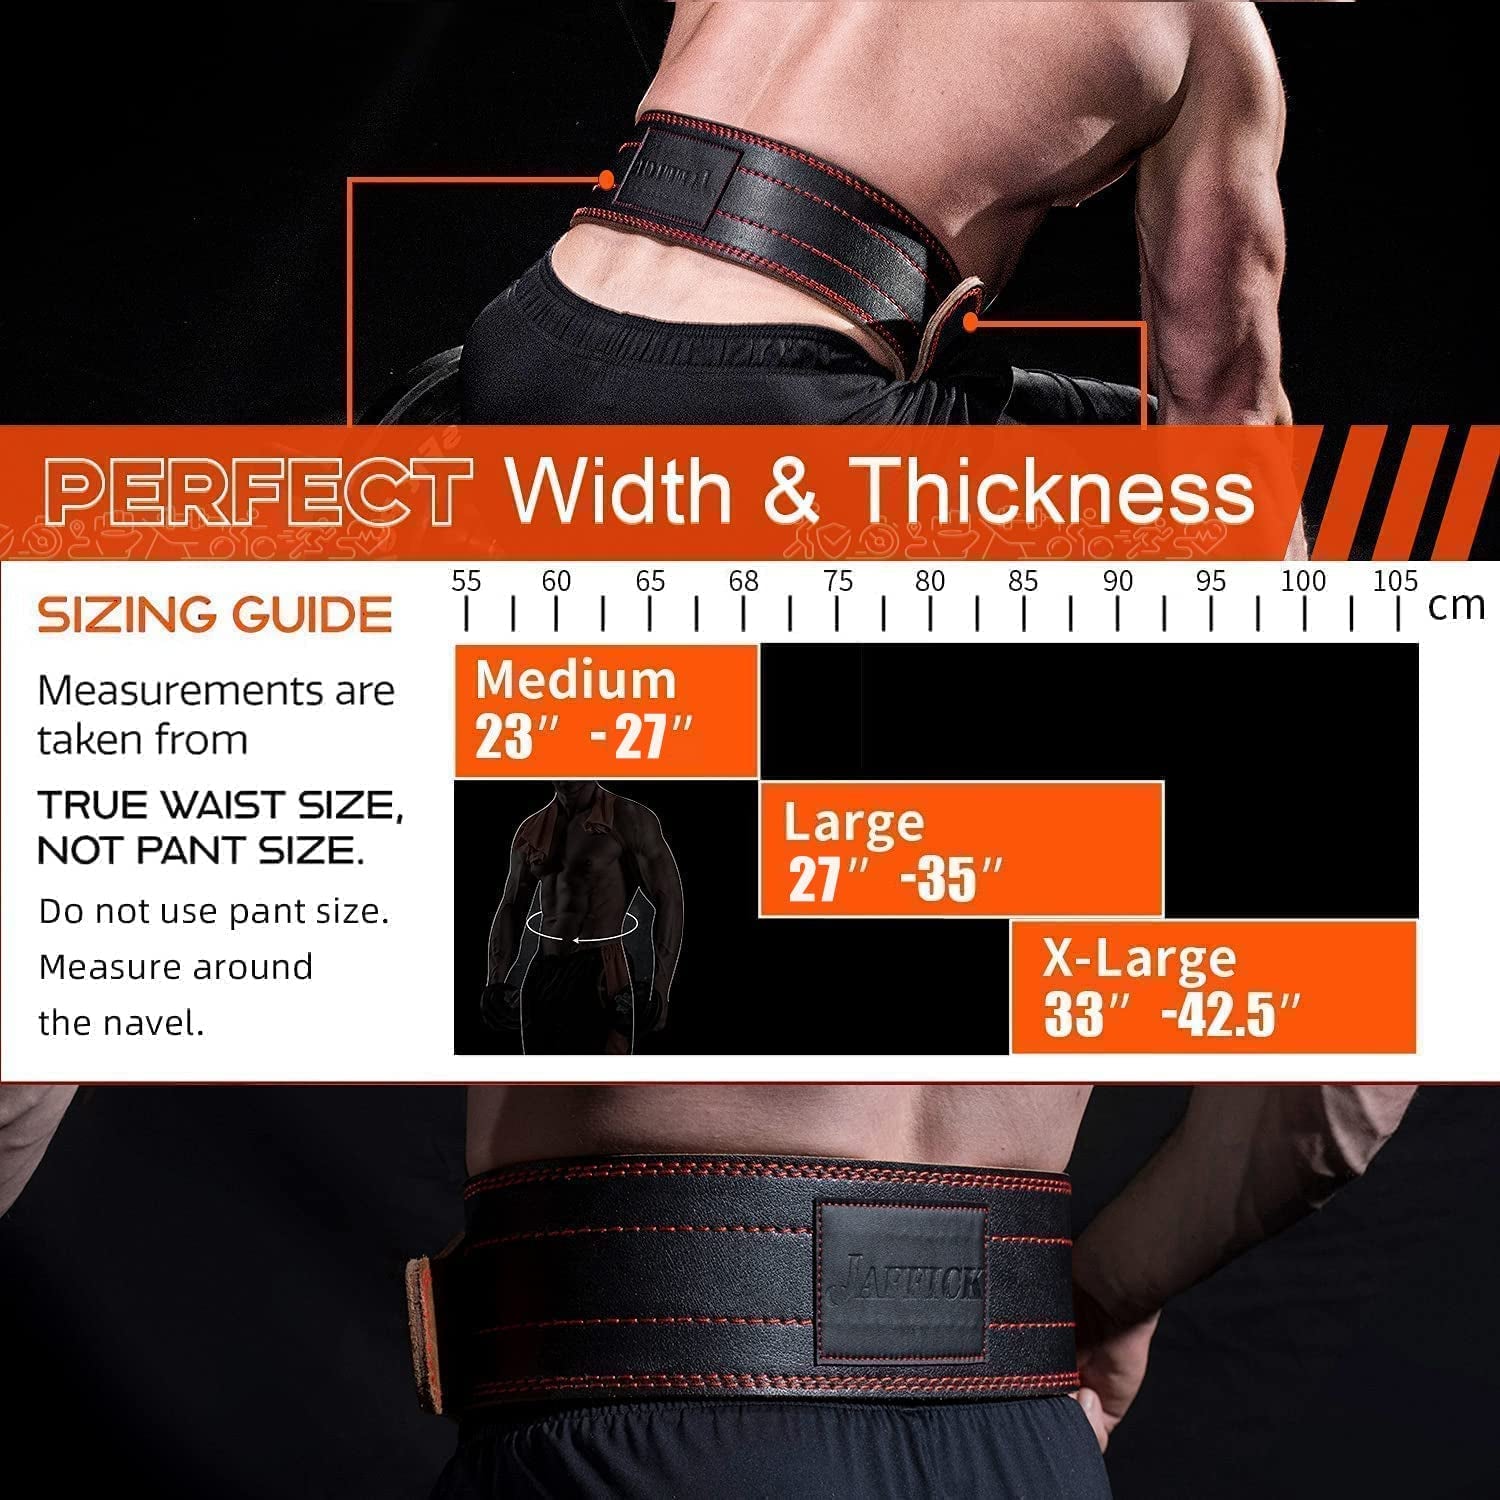 Genuine Leather Weight Lifting Belt (4 Inches Wide) Lower Back Support and Injury Prevention for Gym Fitness Workout Cross Training for Men Women - Squat Deadlift up to 800 Lbs